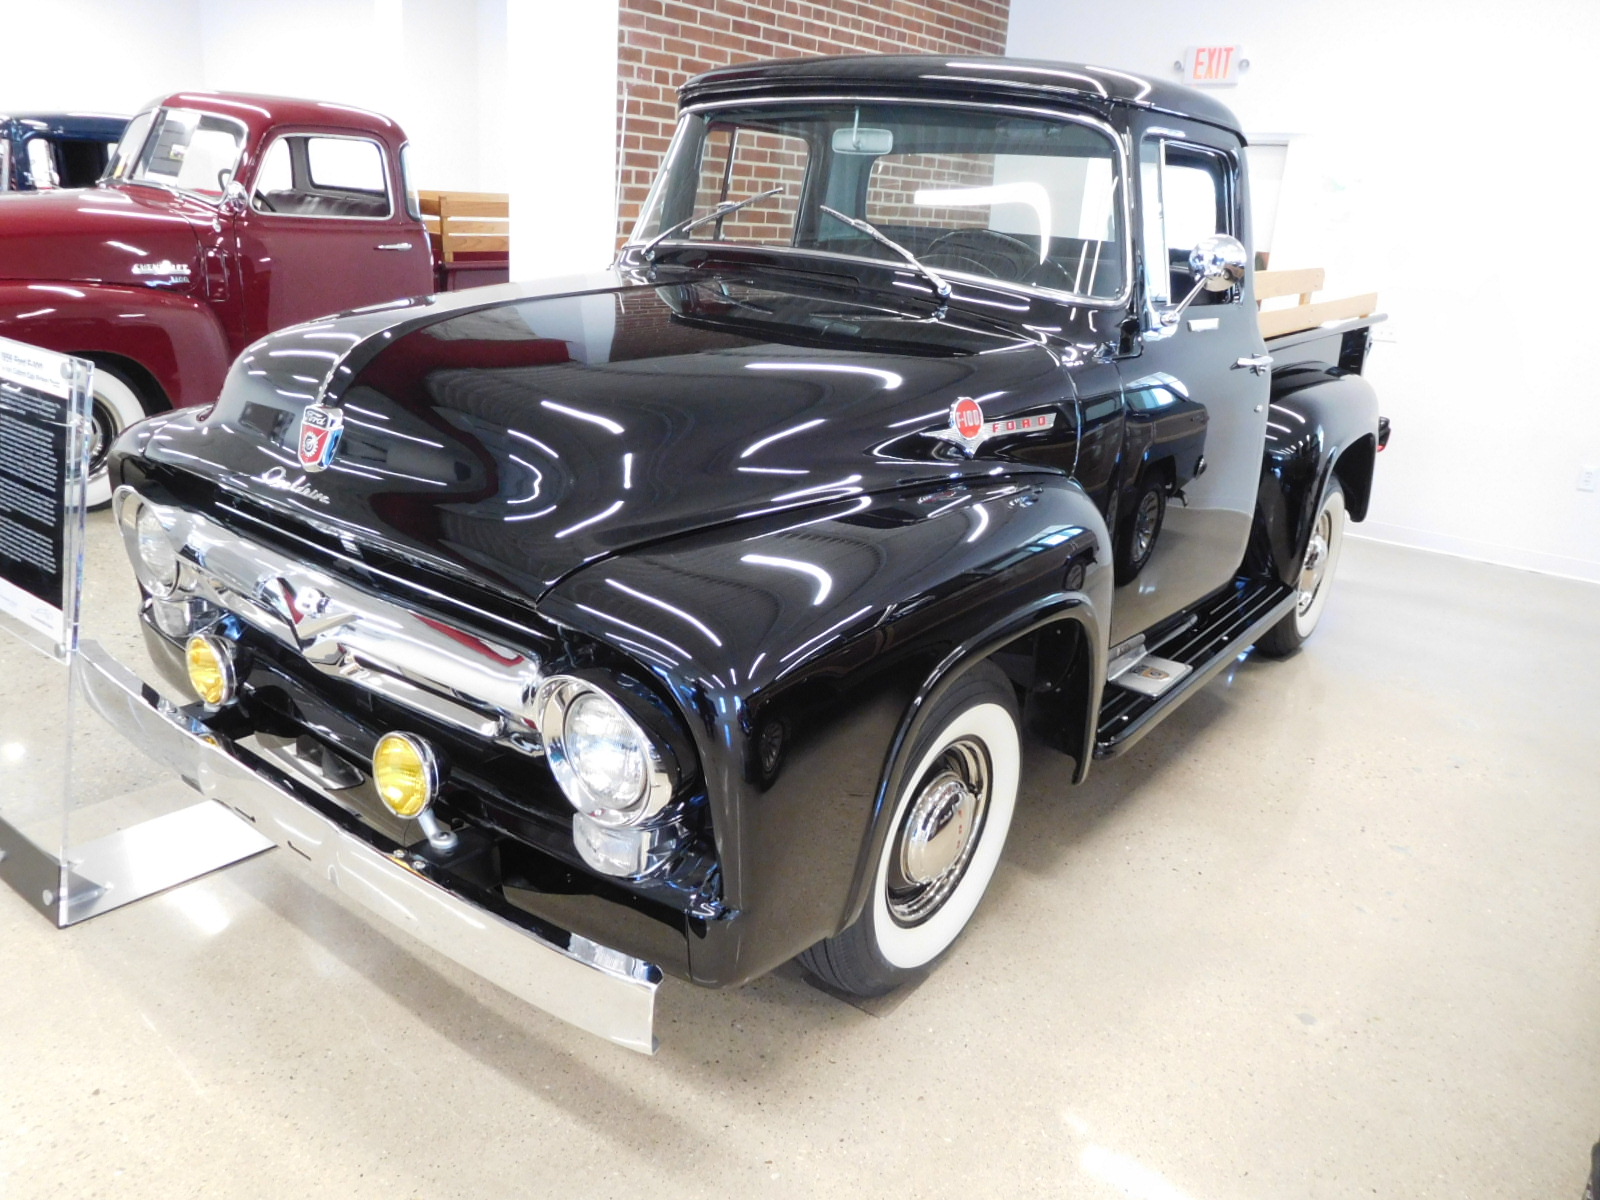 Truck on display at The Automobile Gallery